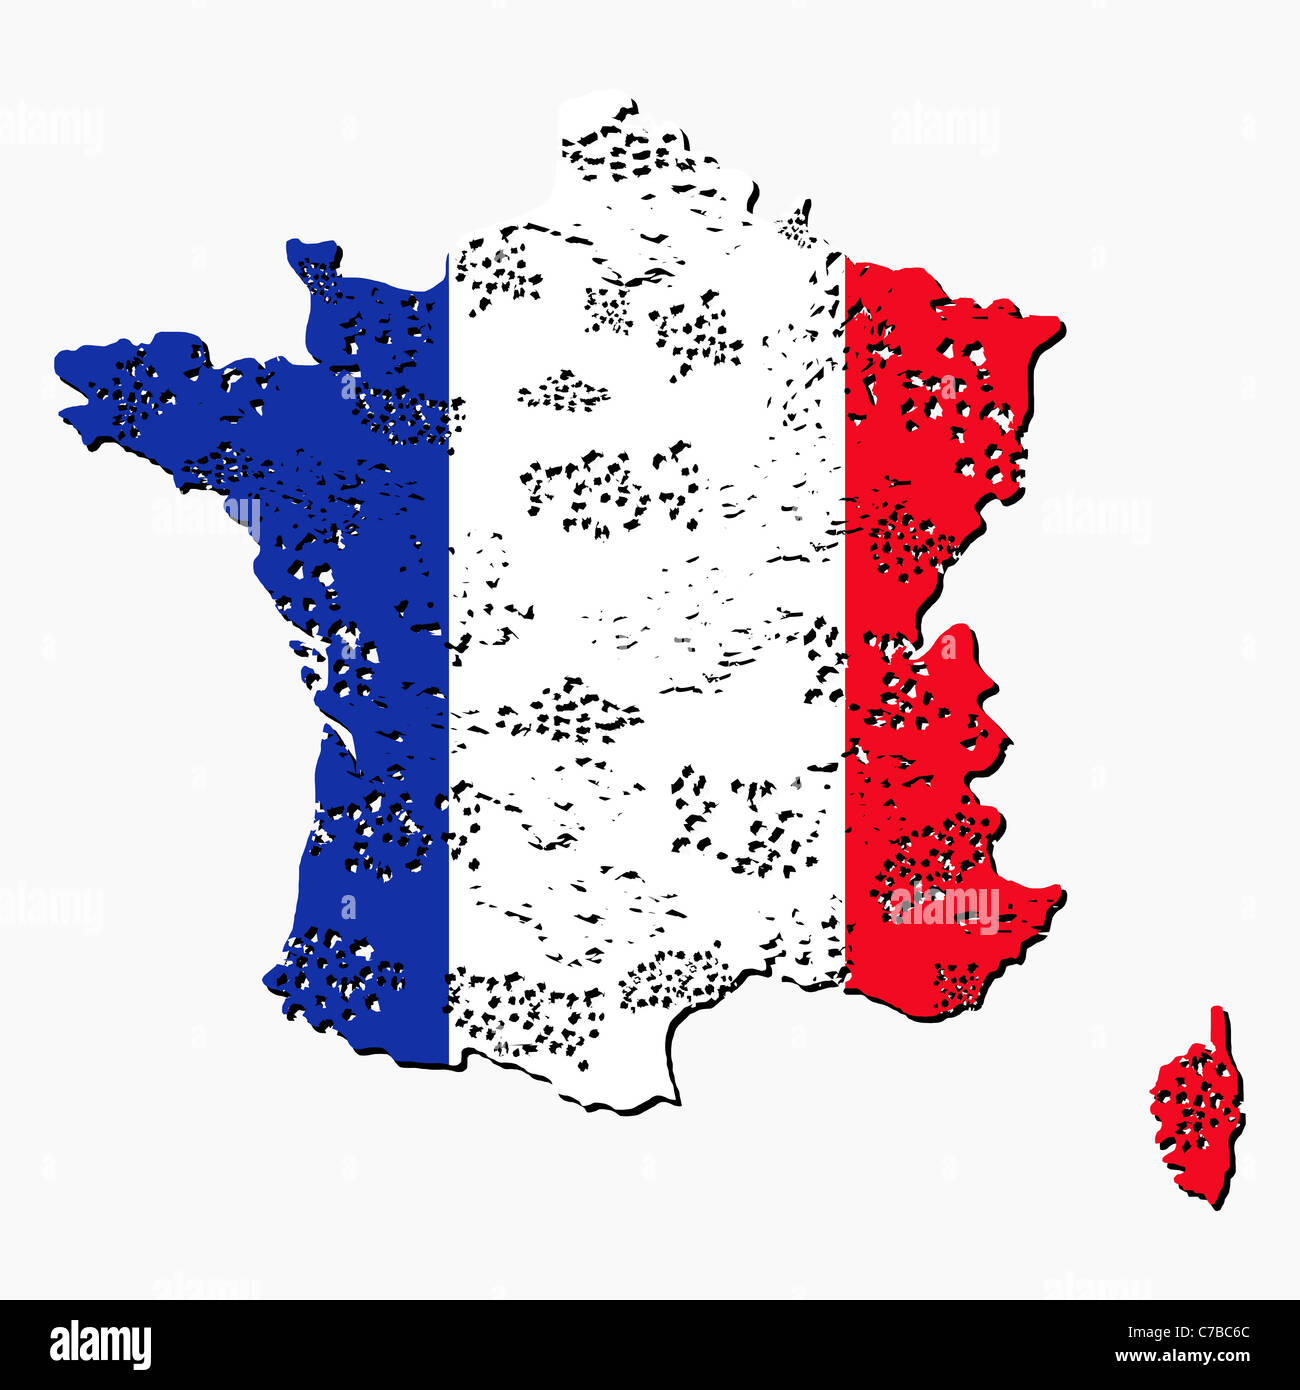 Grunge France map flag with shadow illustration Stock Photo